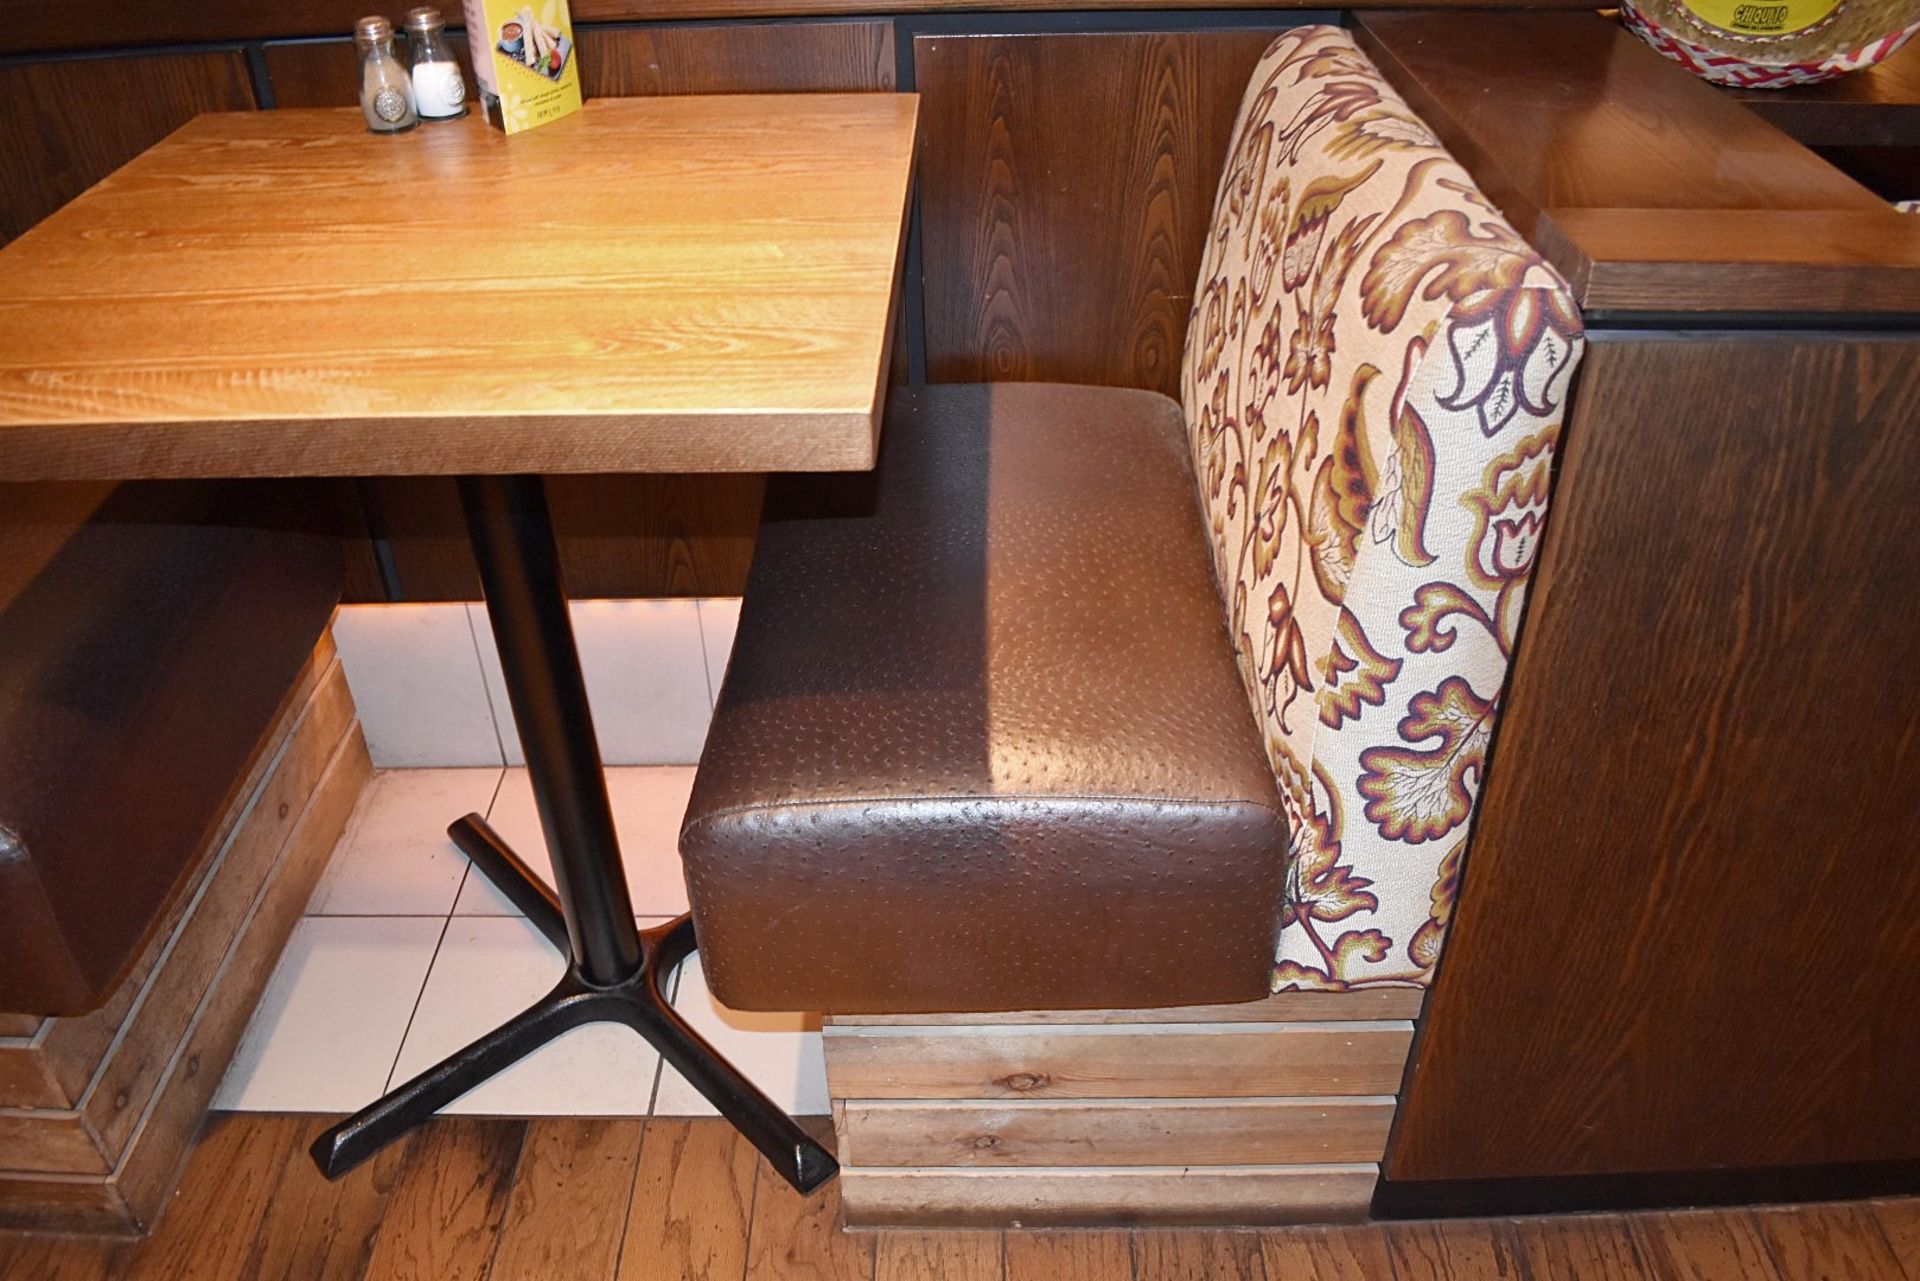 15-Pieces Of Restaurant Booth Seating Of Varying Length - Image 7 of 22